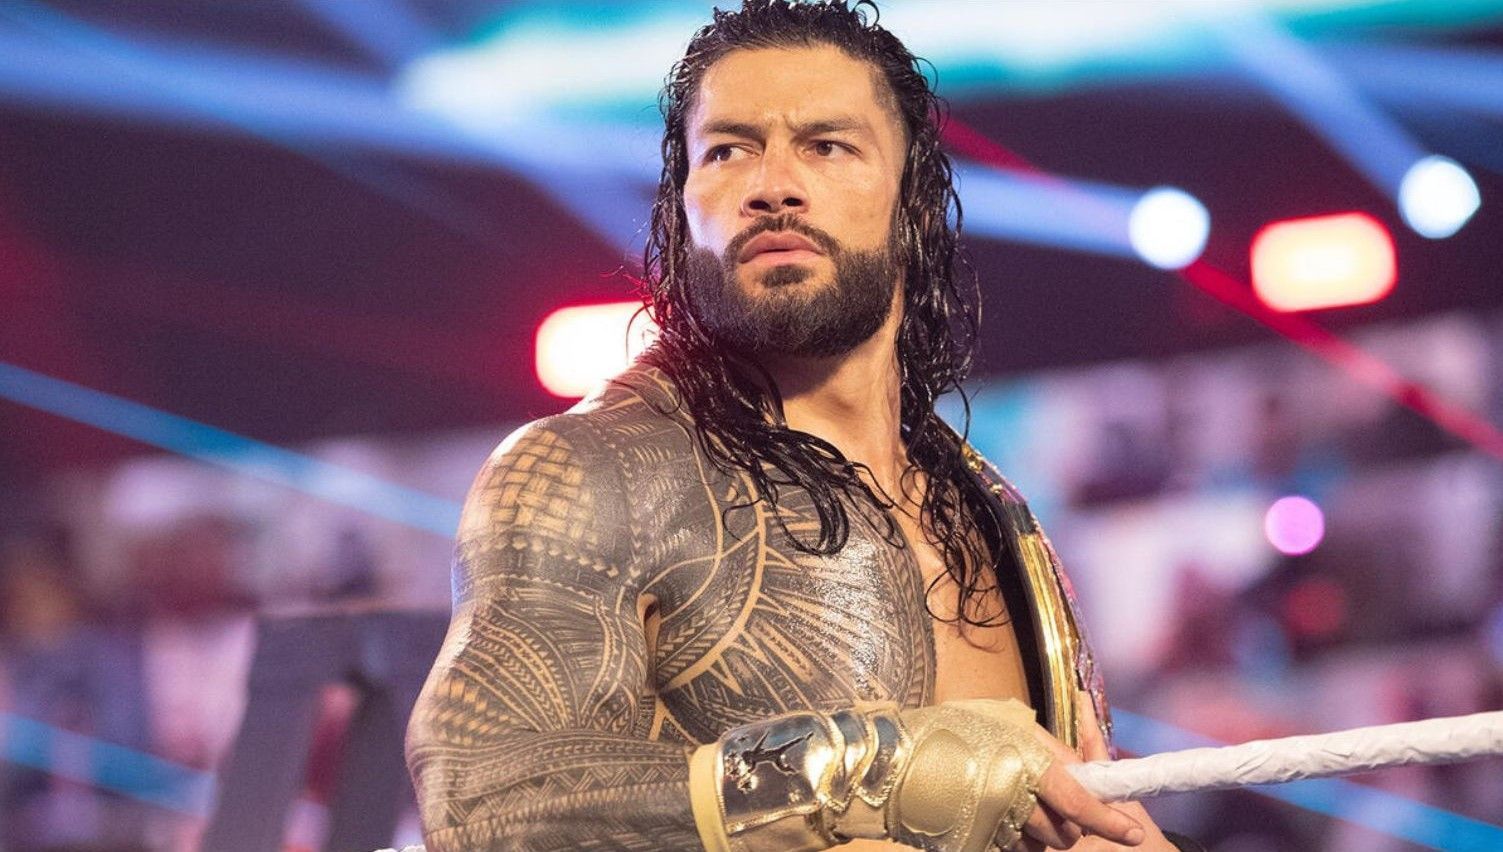 Roman Reigns is arguably the biggest name in WWE today!